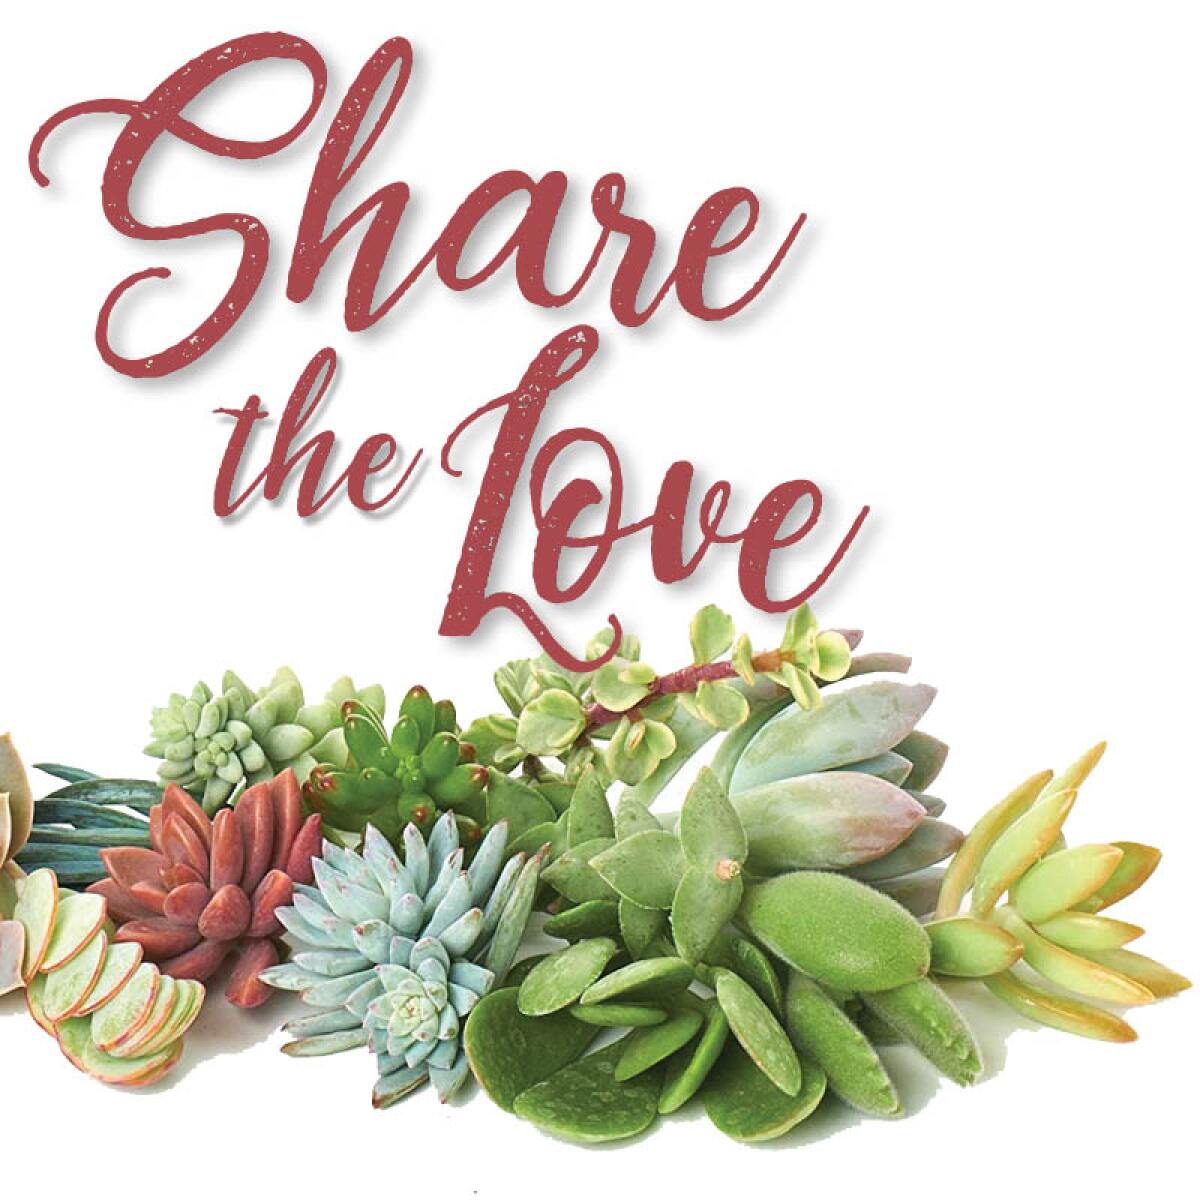 Master Gardener and club member Andrea Kessler will discuss how to grow cuttings, succulents and bulbs at the Feb. 10 event.